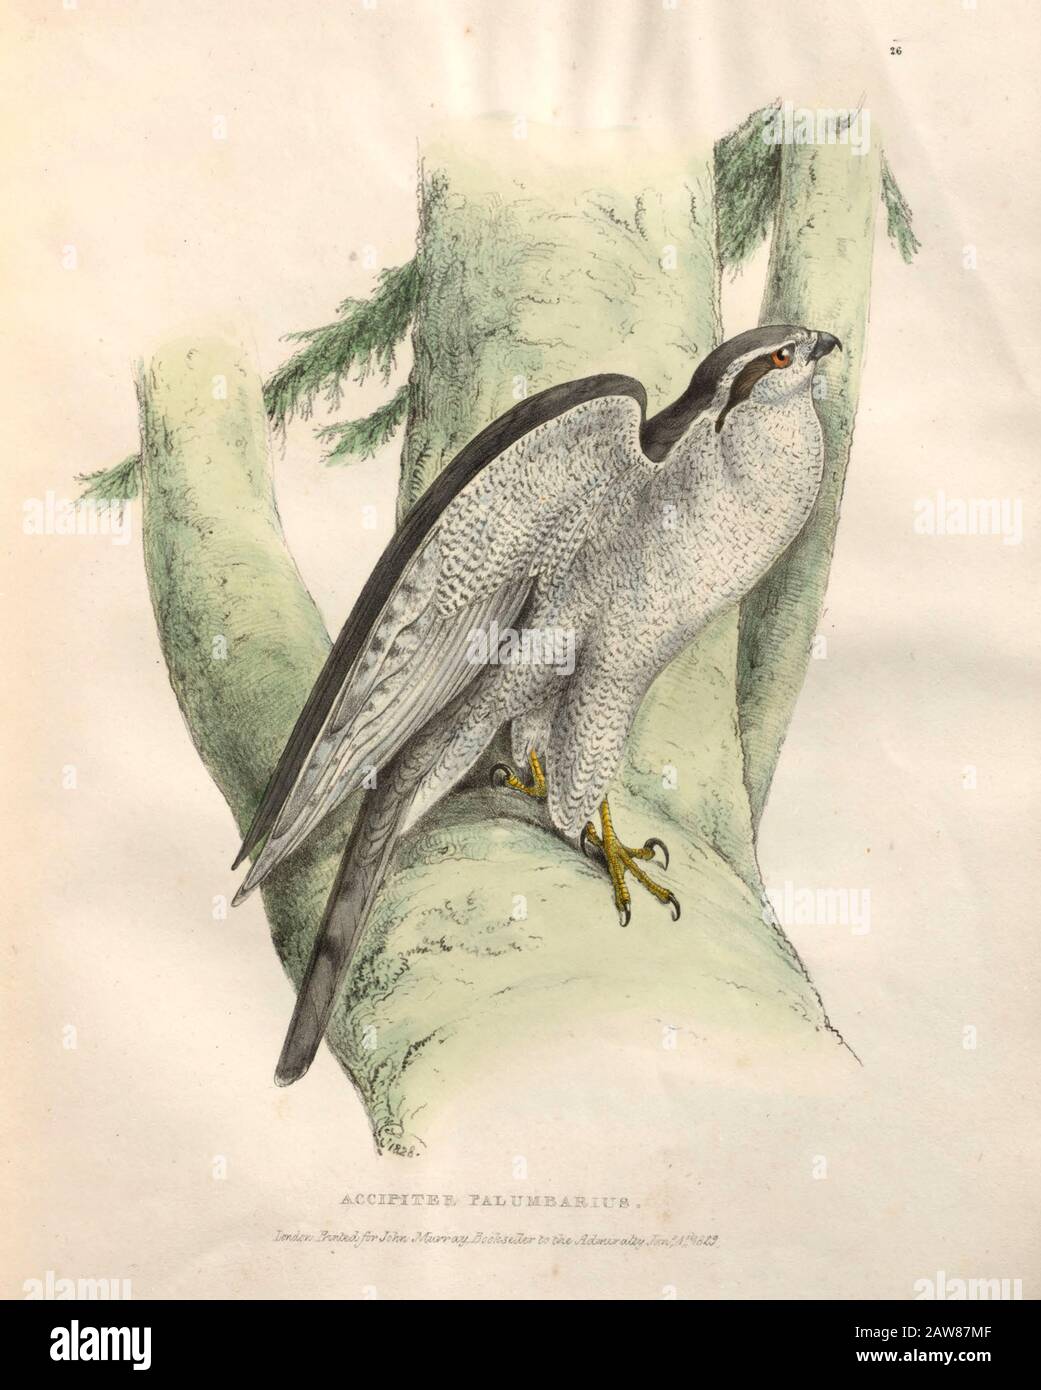 Pigeon Hawk (Accipiter Palumbarius). color plates of North American birds from Fauna boreali-americana; or, The zoology of the northern parts of British America, containing descriptions of the objects of natural history collected on the late northern land expeditions under command of Capt. Sir John Franklin by Richardson, John, Sir, 1787-1865 Published 1829 Stock Photo